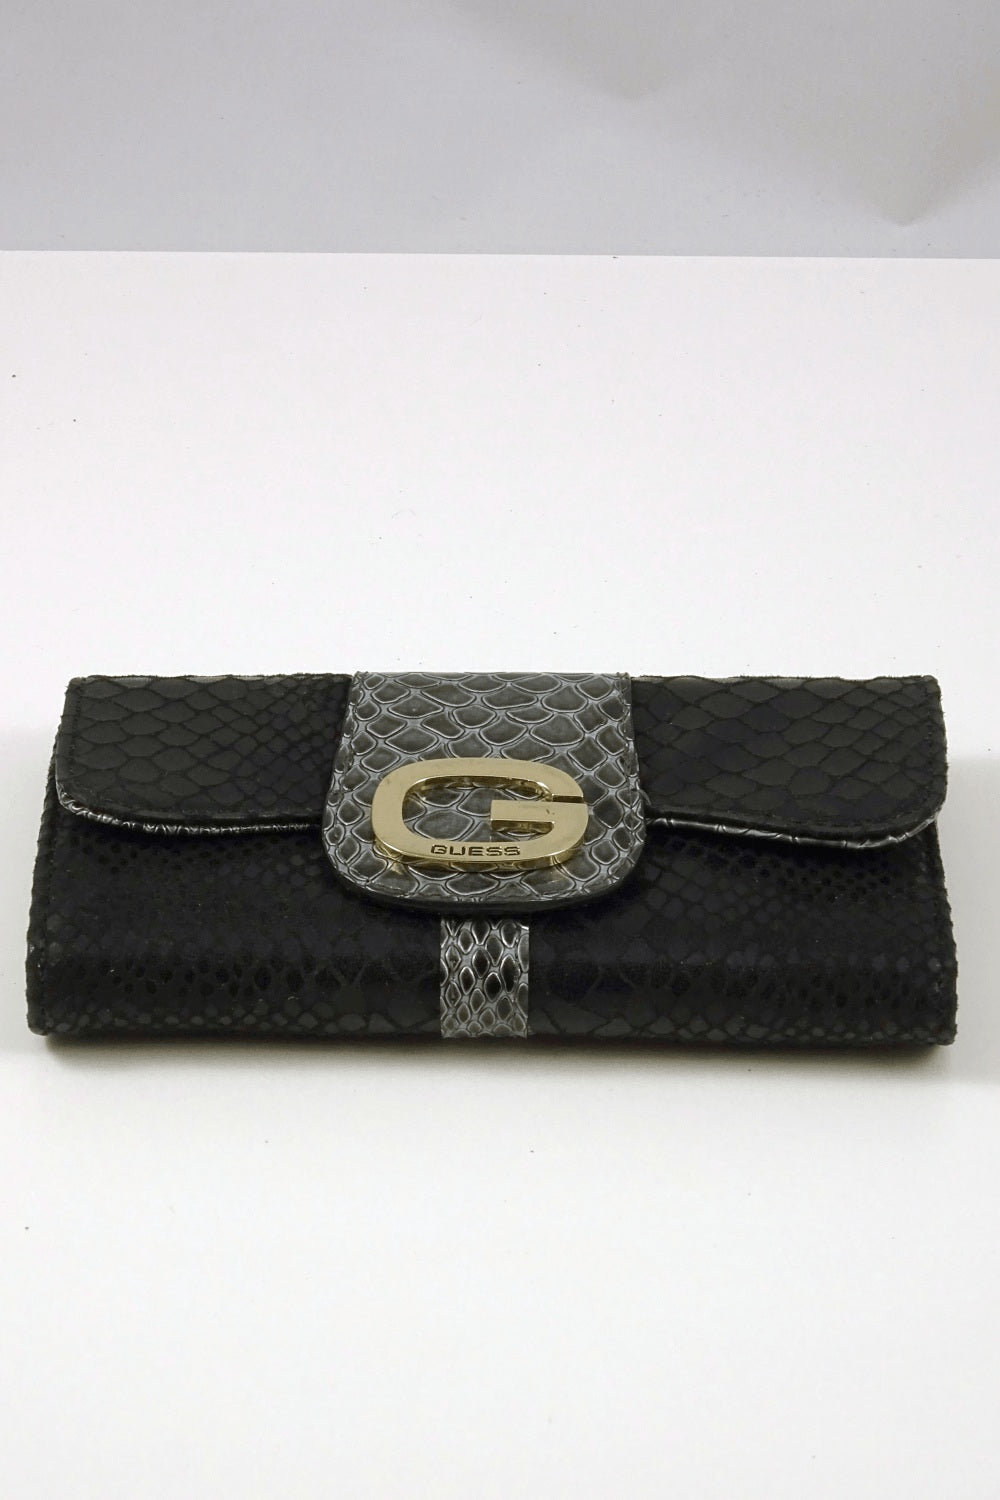 Guess Black and Silver Wallet